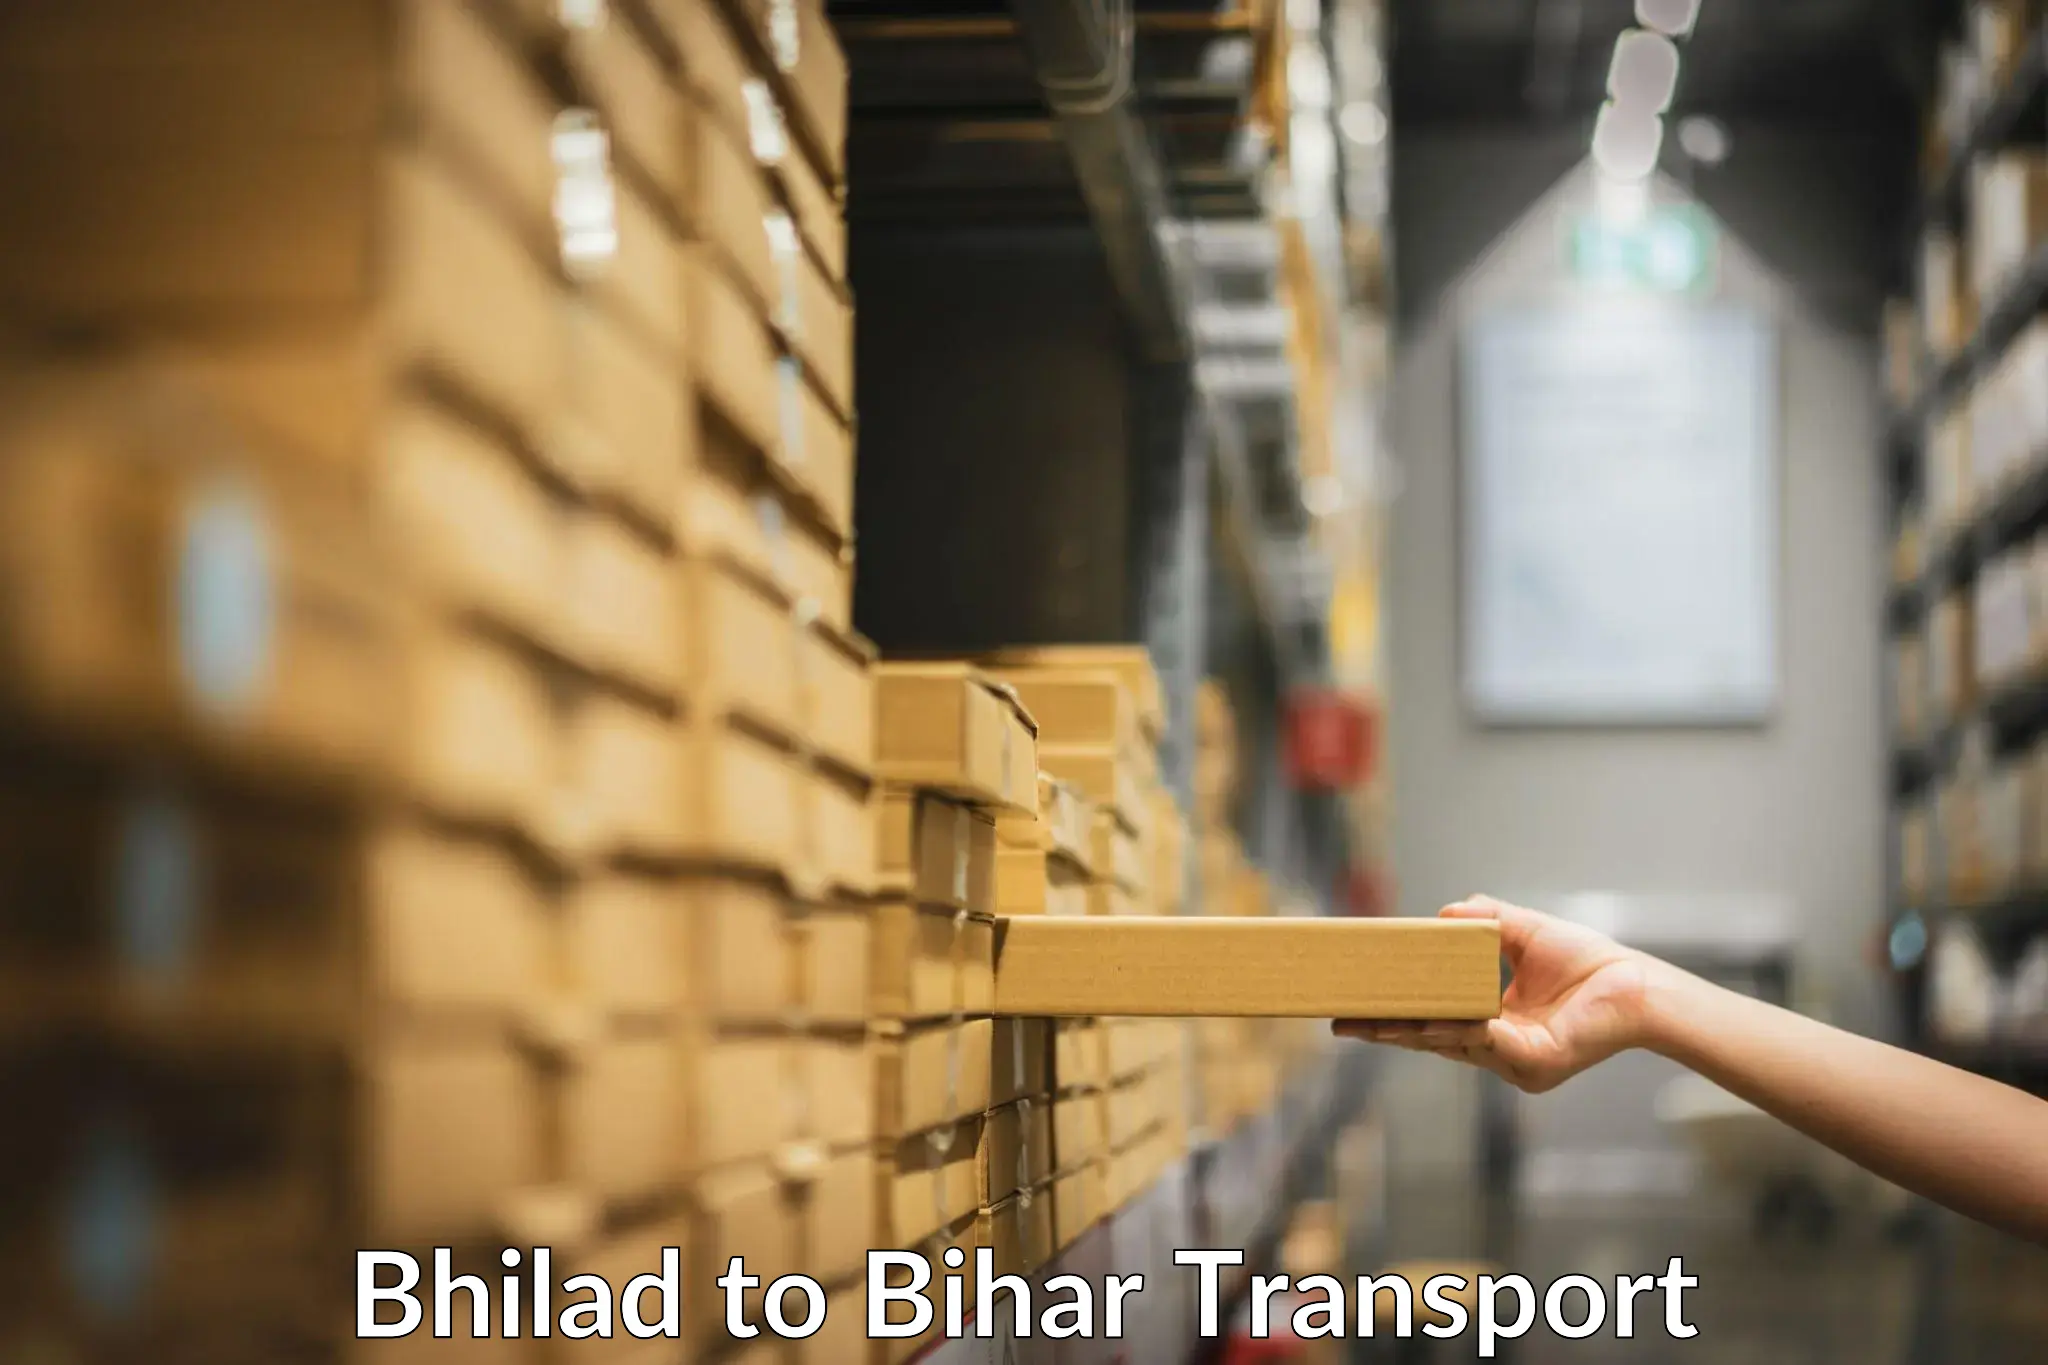 Shipping services in Bhilad to Maheshkhunt